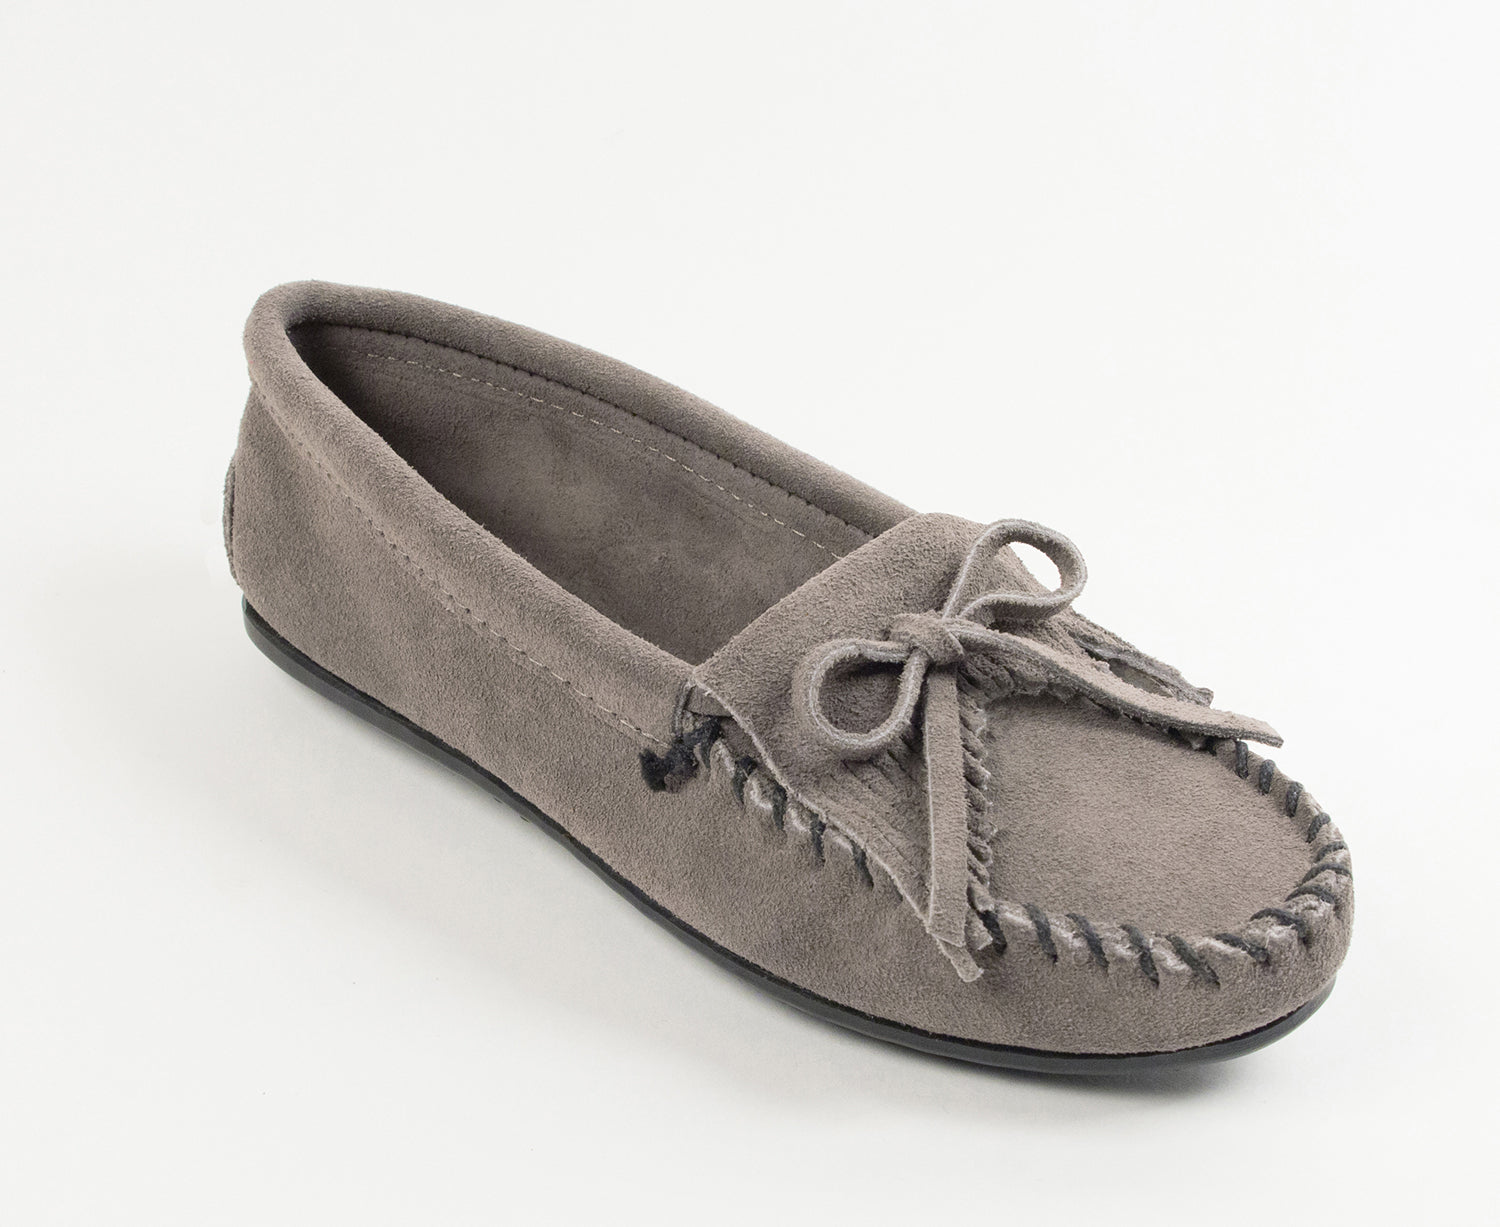 Kilty Hardsole Moccasin in Grey from 3/4 Angle View